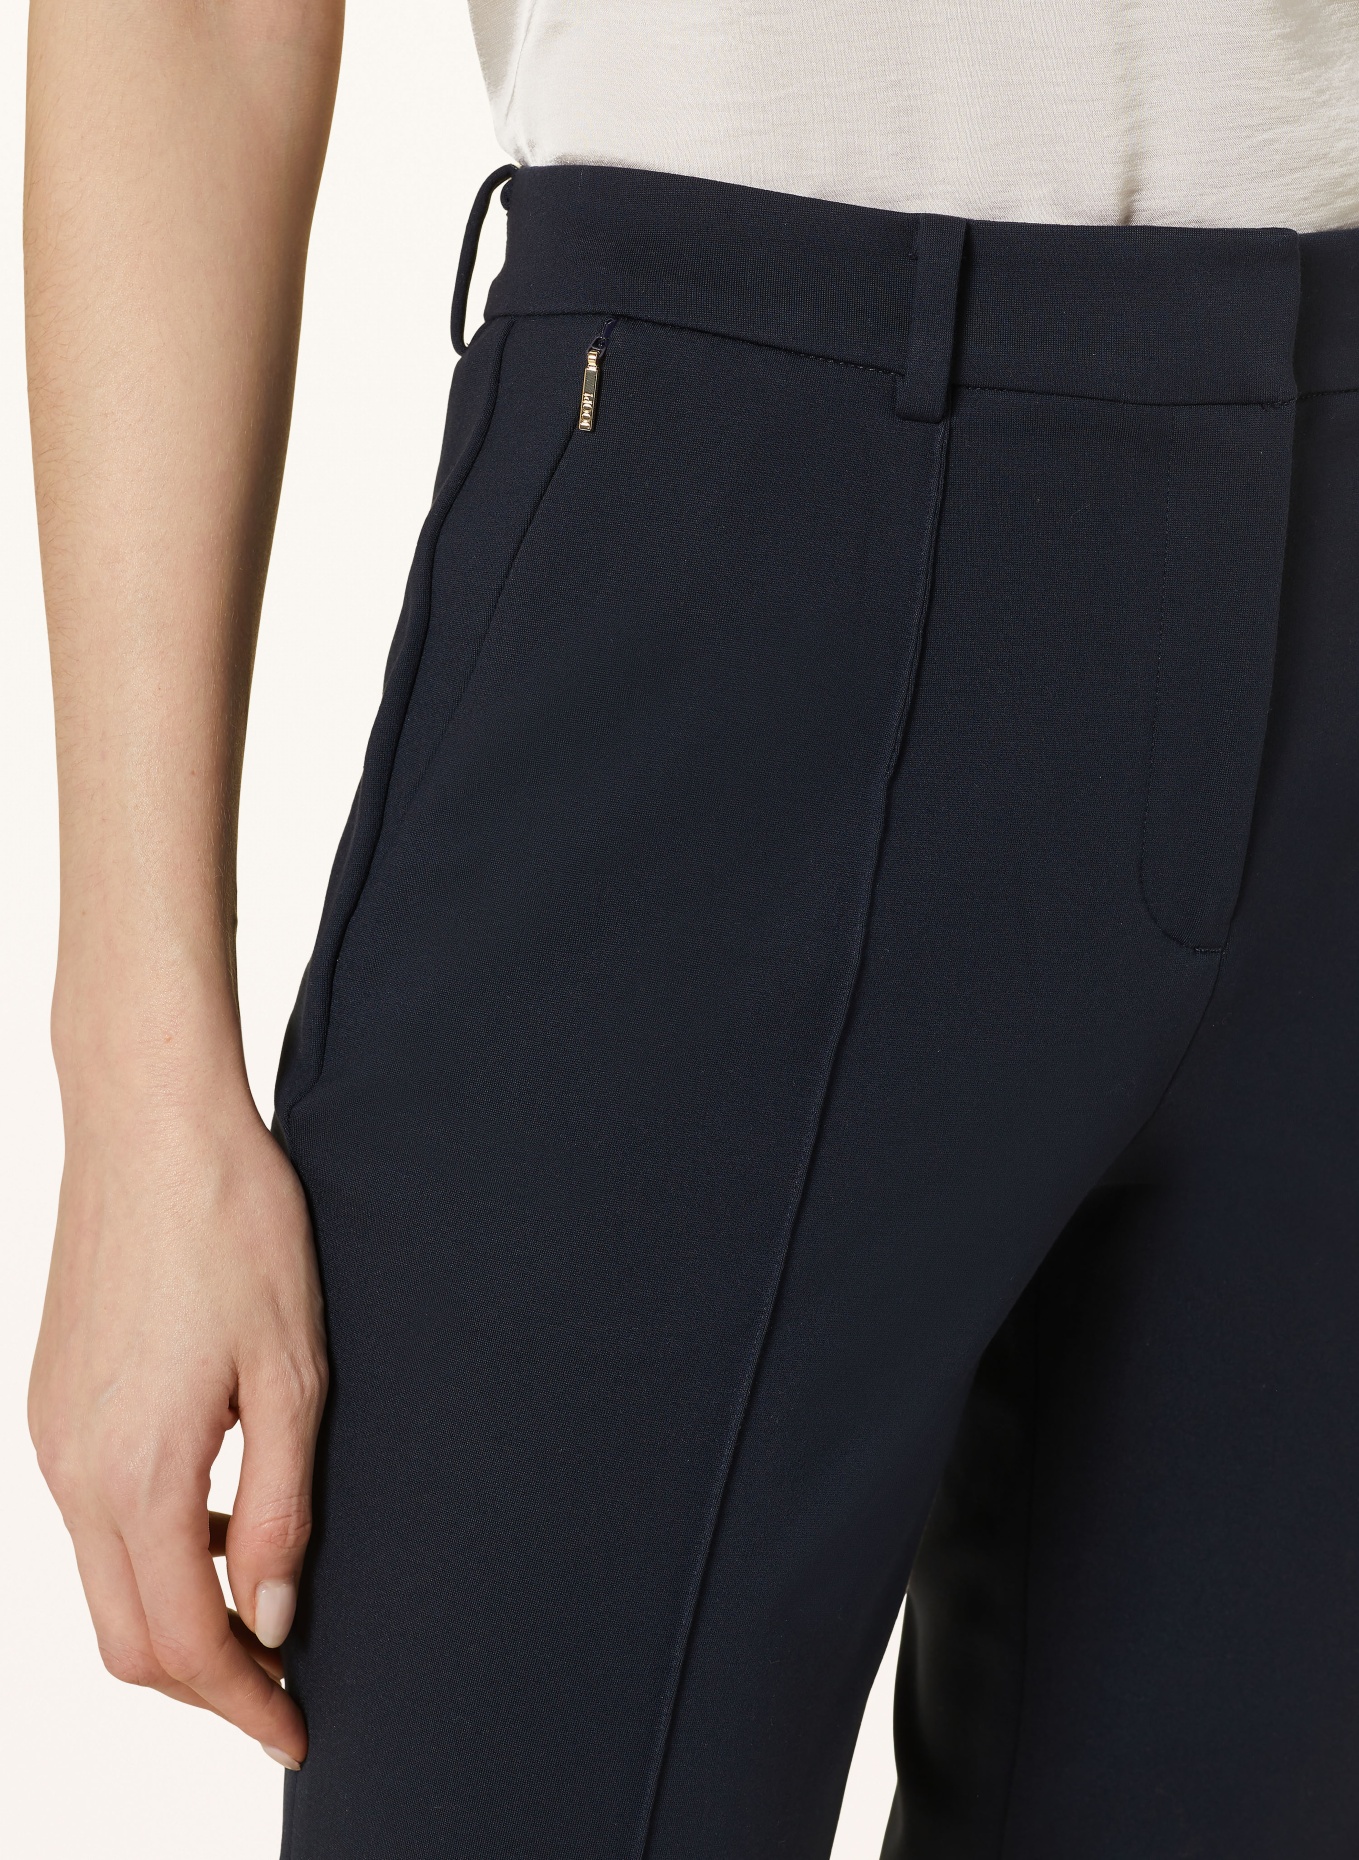 JOOP! 7/8 trousers made of jersey, Color: DARK BLUE (Image 5)